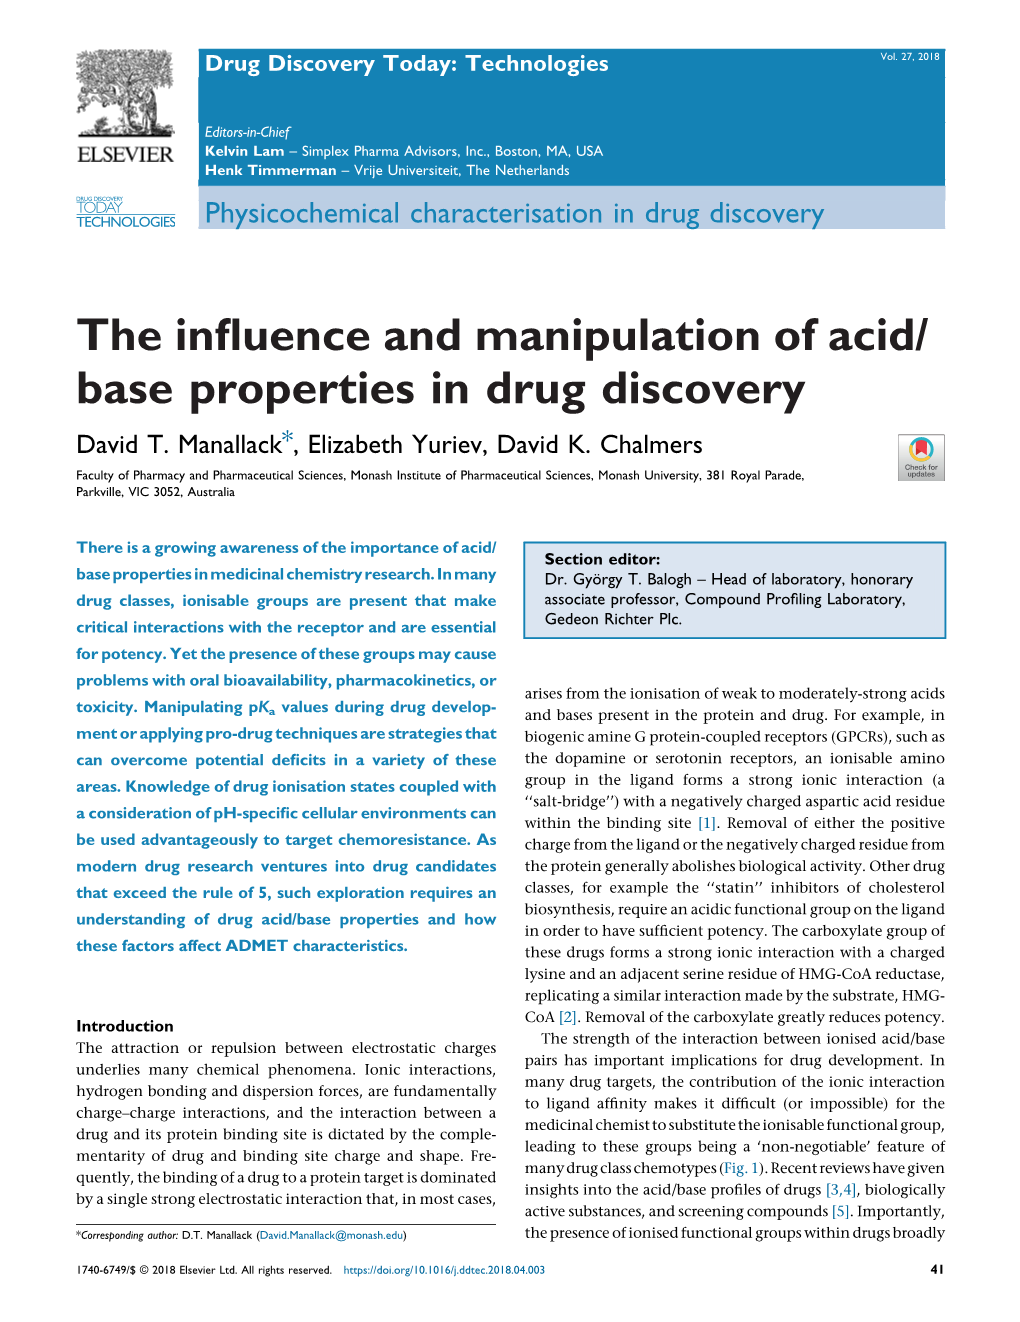 The Influence and Manipulation of Acid/Base Properties in Drug Discovery